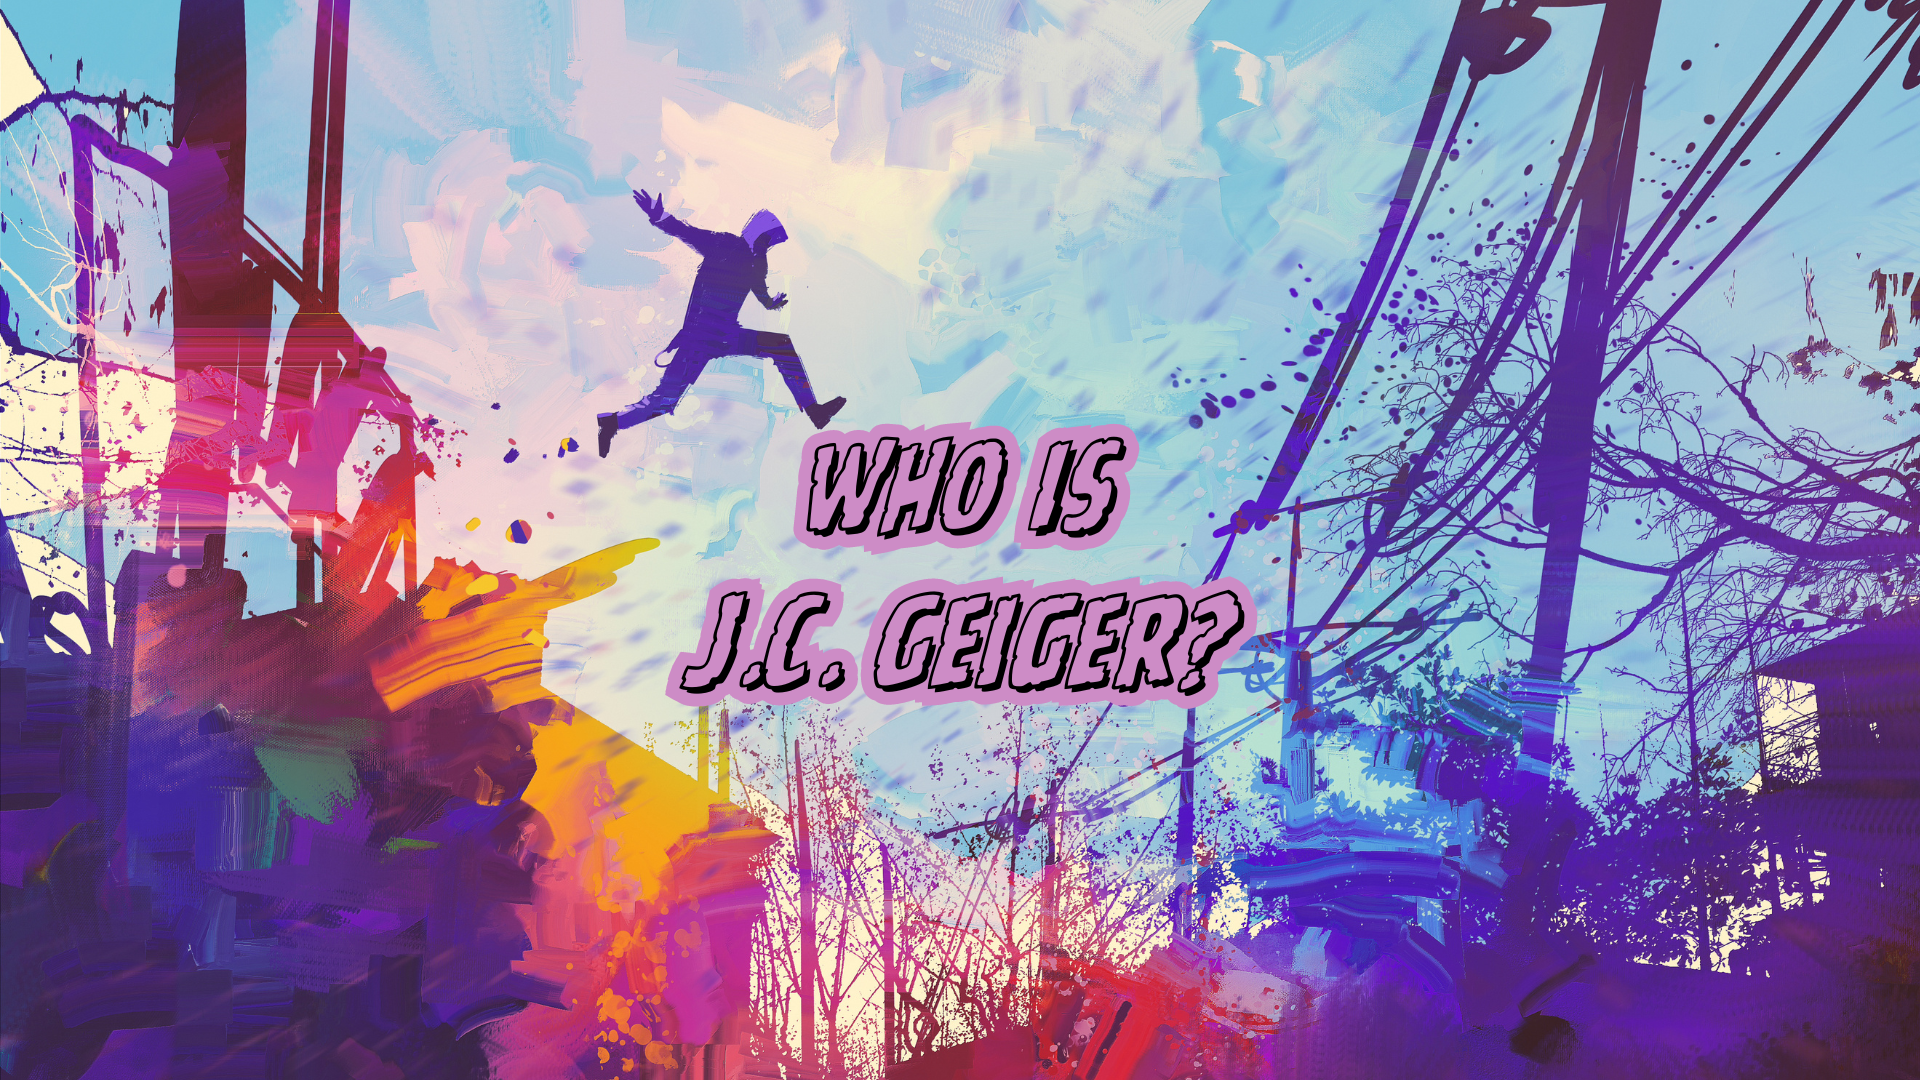 Who Is J.C. Geiger